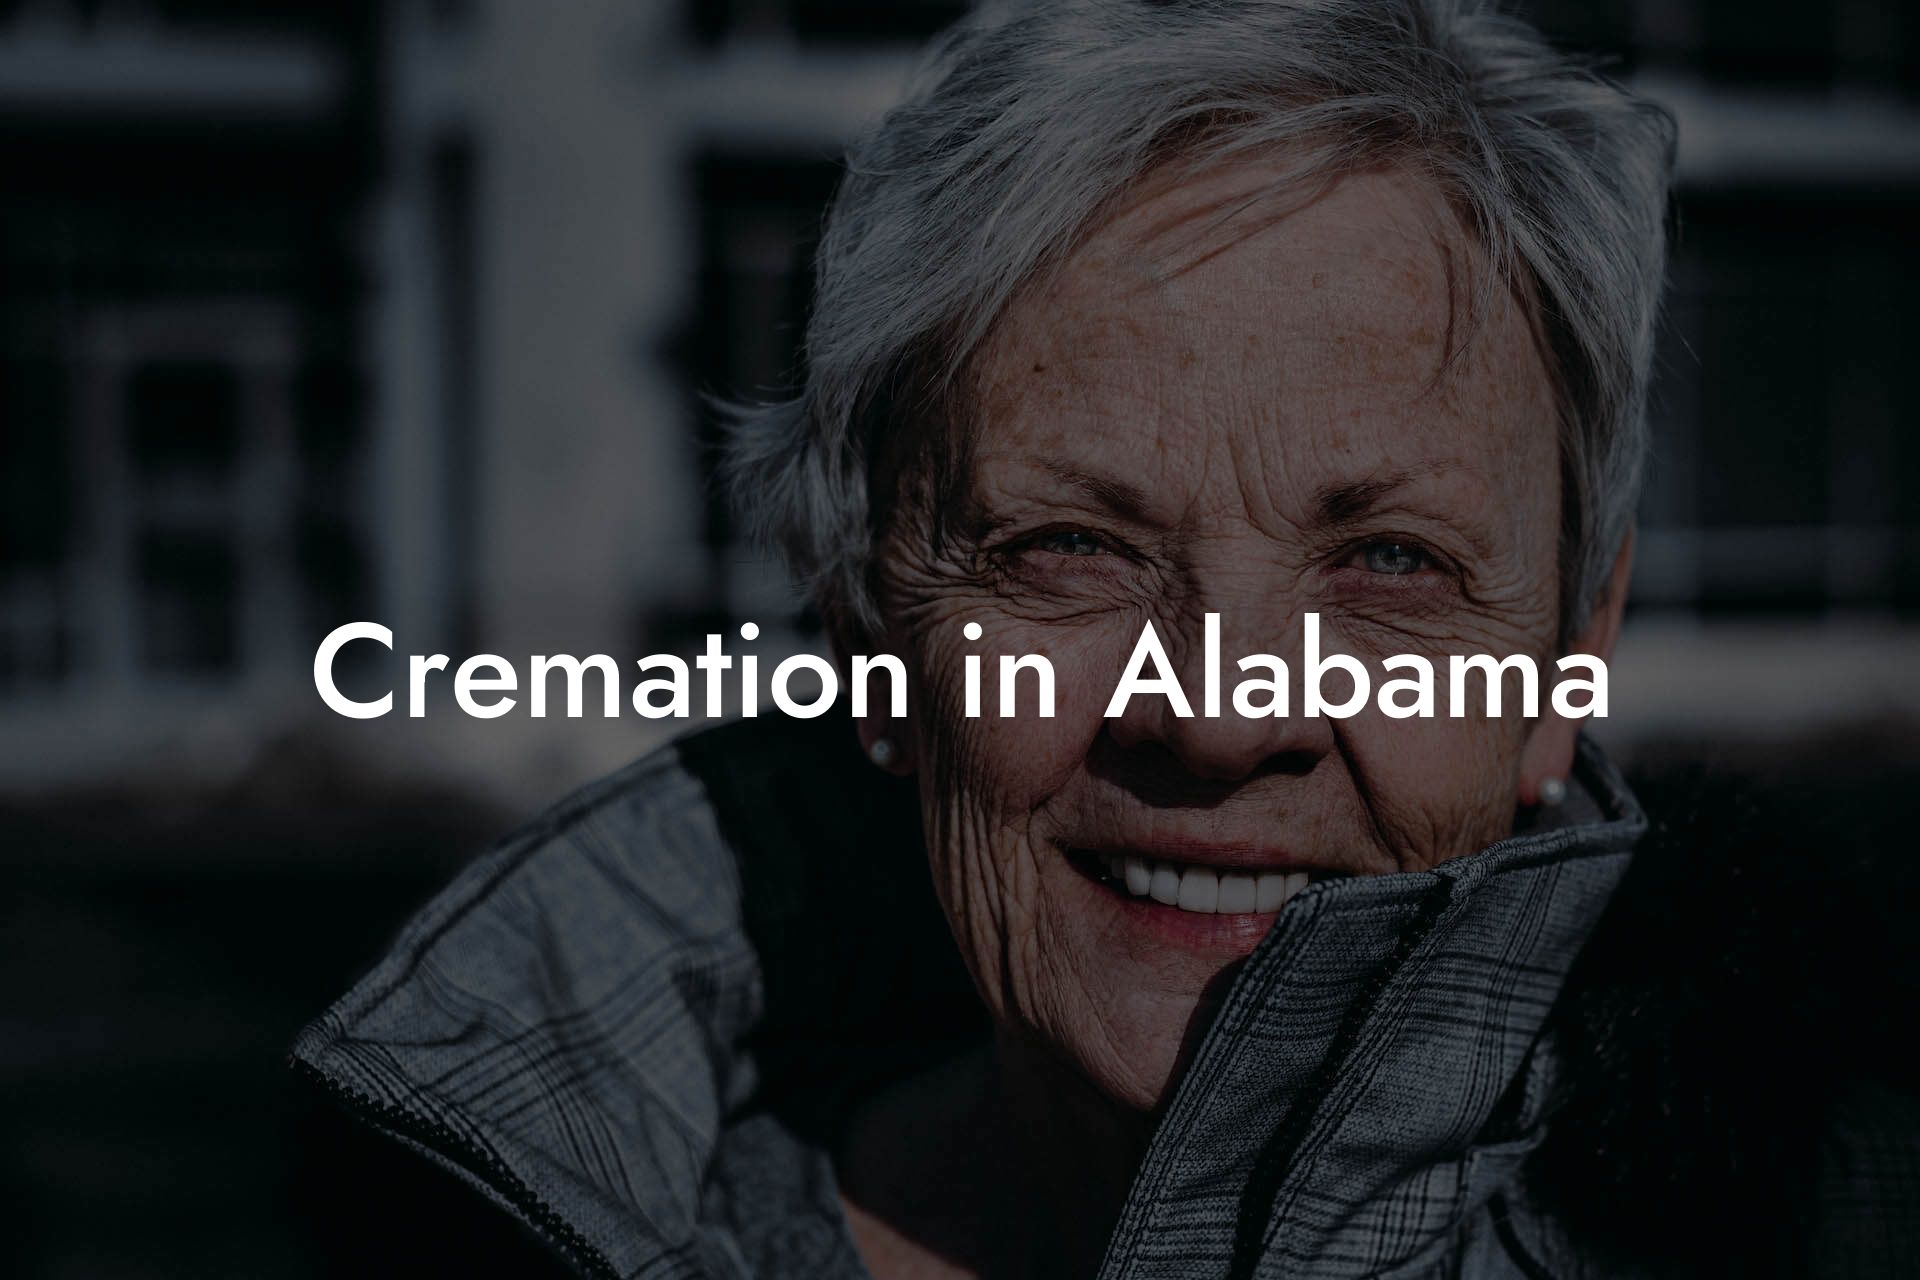 Cremation in Alabama